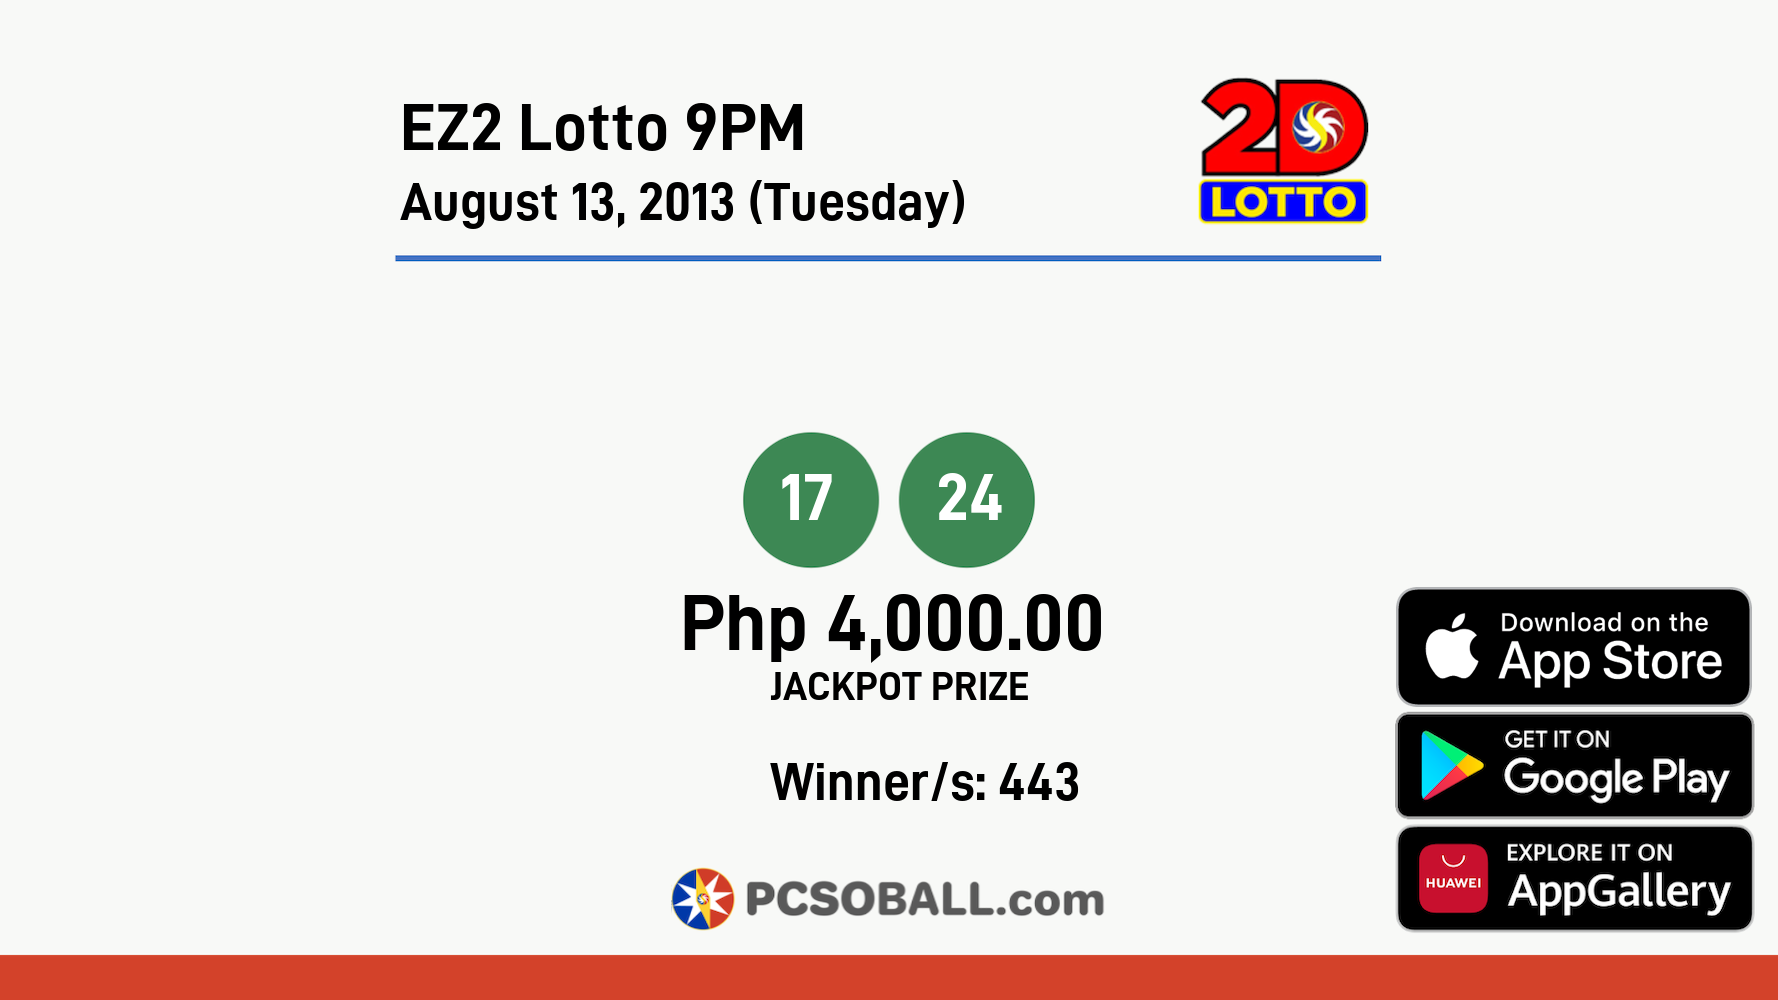 EZ2 Lotto 9PM August 13, 2013 (Tuesday) Result